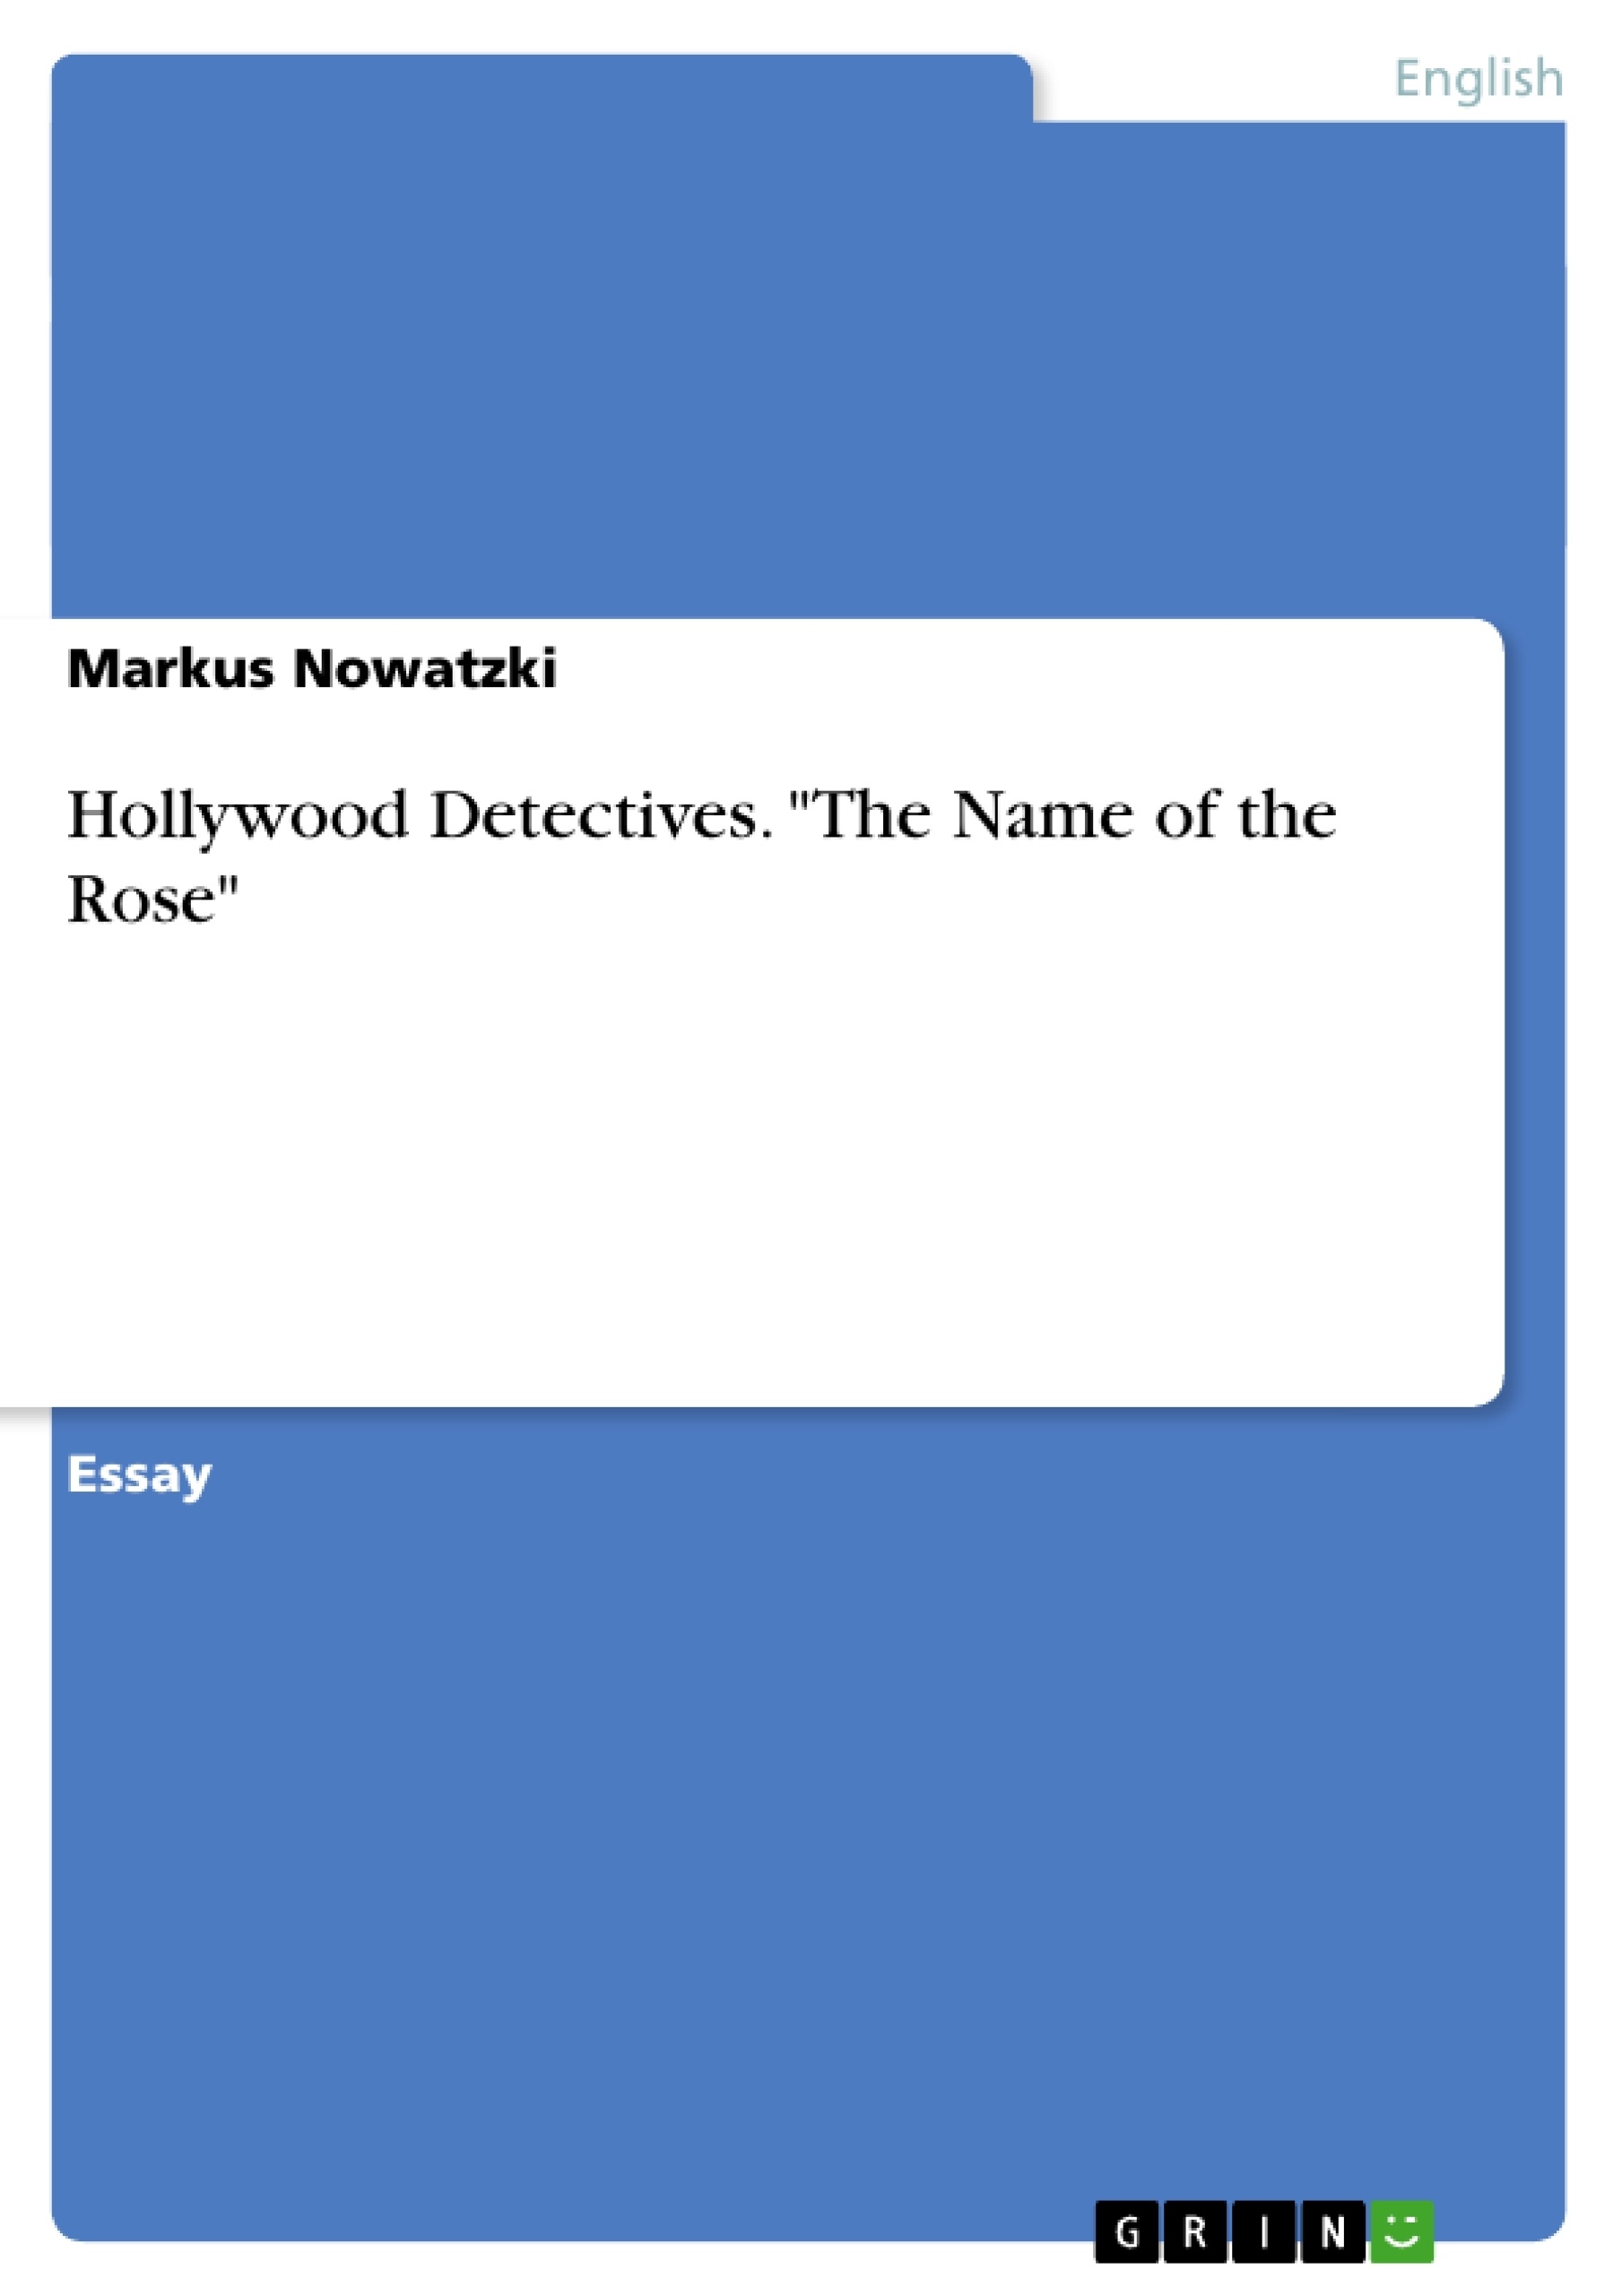 Title: Hollywood Detectives. "The Name of the Rose"